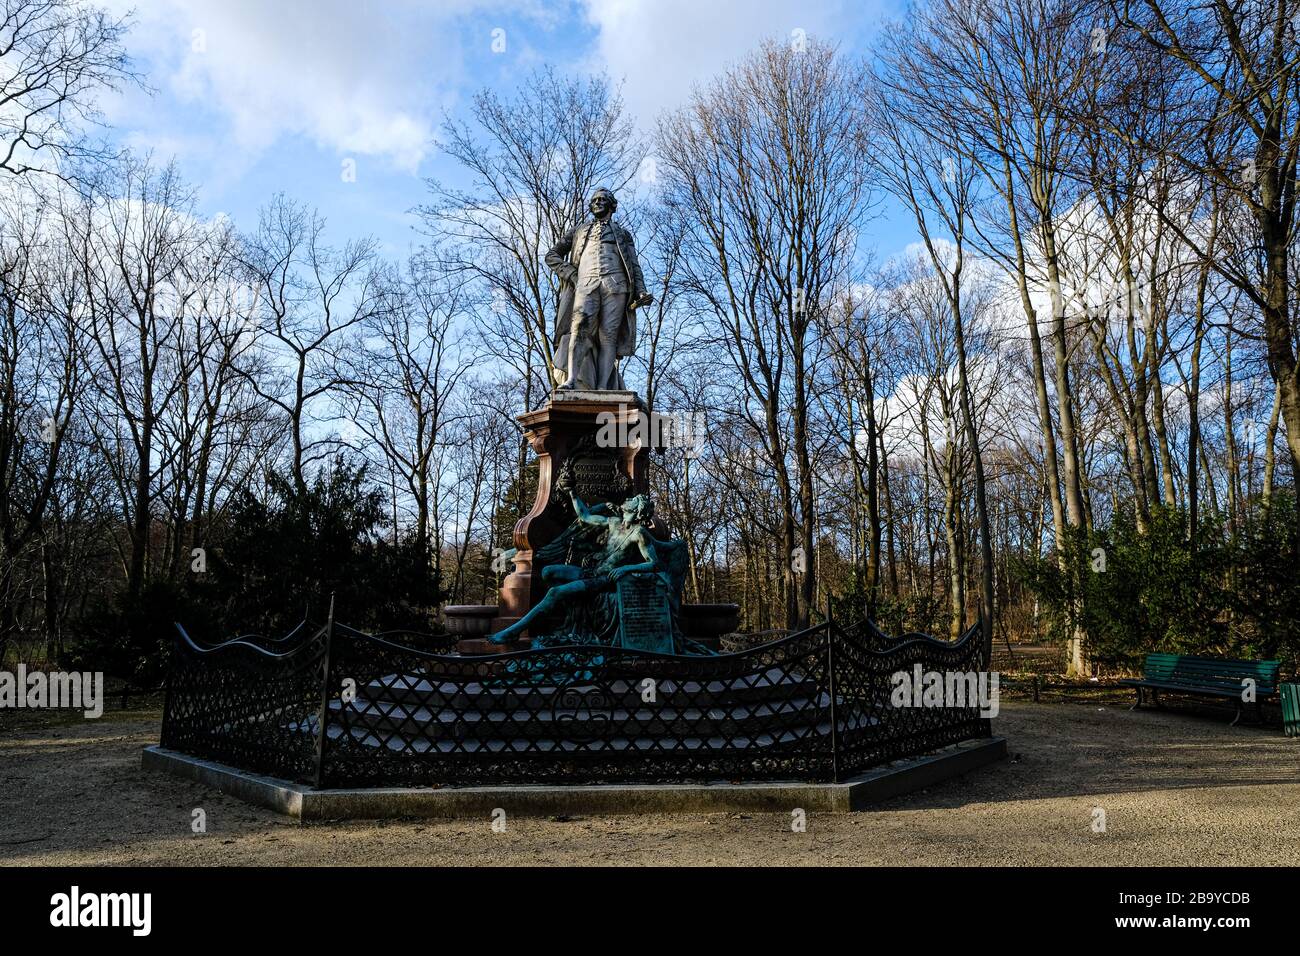 Lessing Monument in the Tiergarten on Friday 28 February 2020 at Tiergarten, Berlin. The Lessing Monument (German: Lessing-Denkmal) is a monument to Gotthold Ephraim Lessing by Otto Lessing. Picture by Julie Edwards. Stock Photo